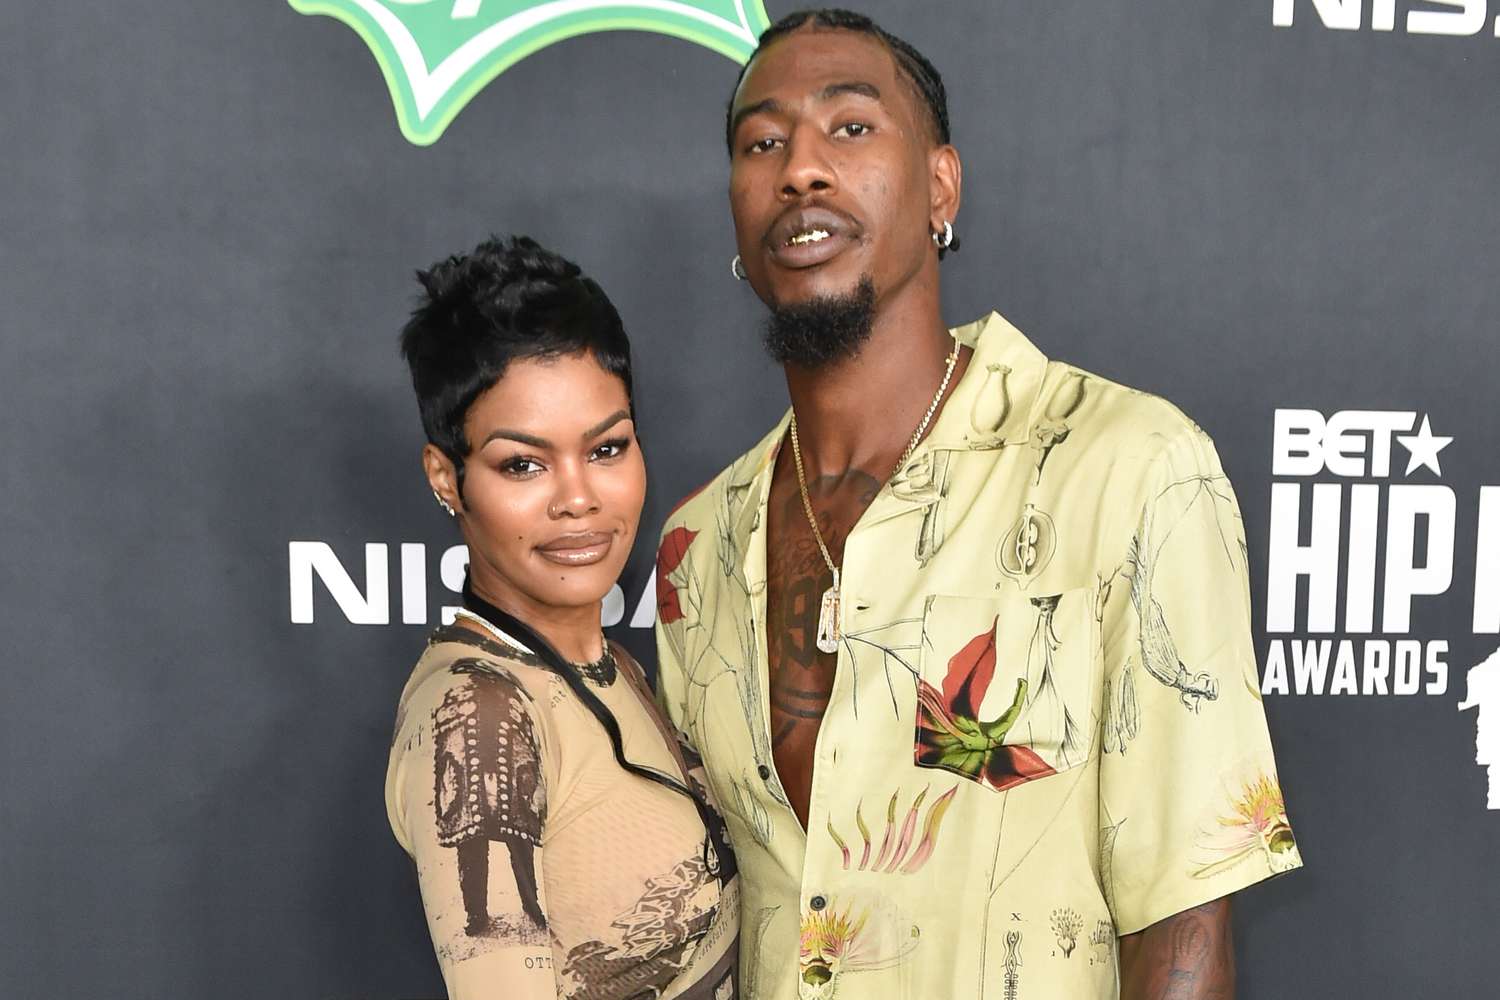 Teyana Taylor And Iman Shumpert: The Public Unraveling Of Their Divorce